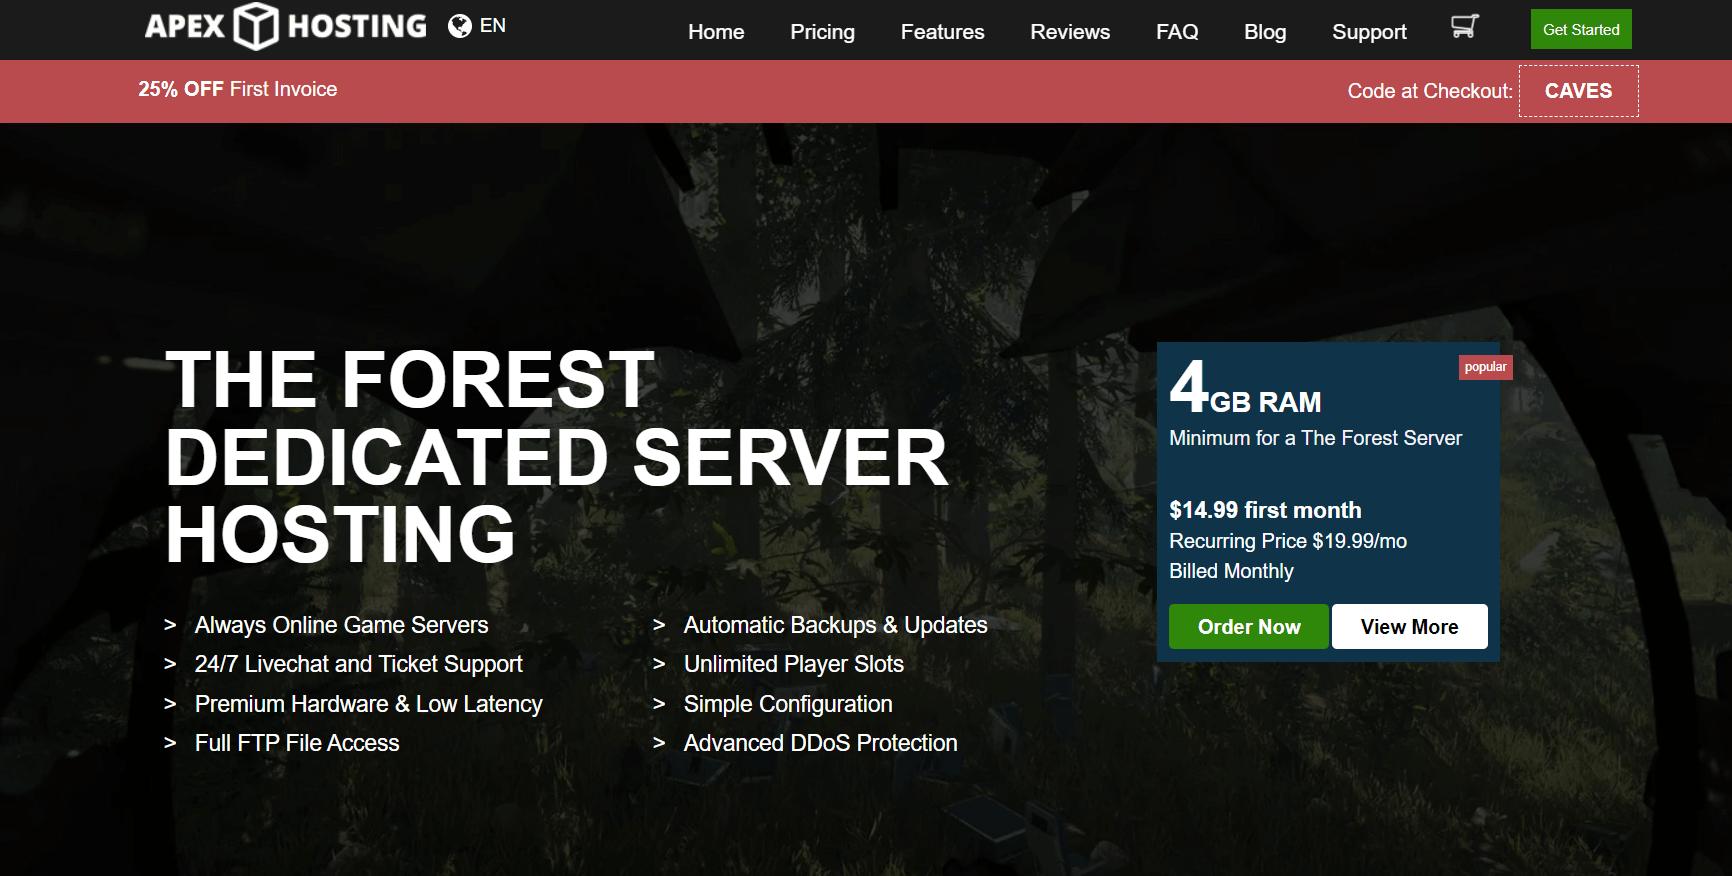 Main features of a dedicated The Forest server by Apex Hosting